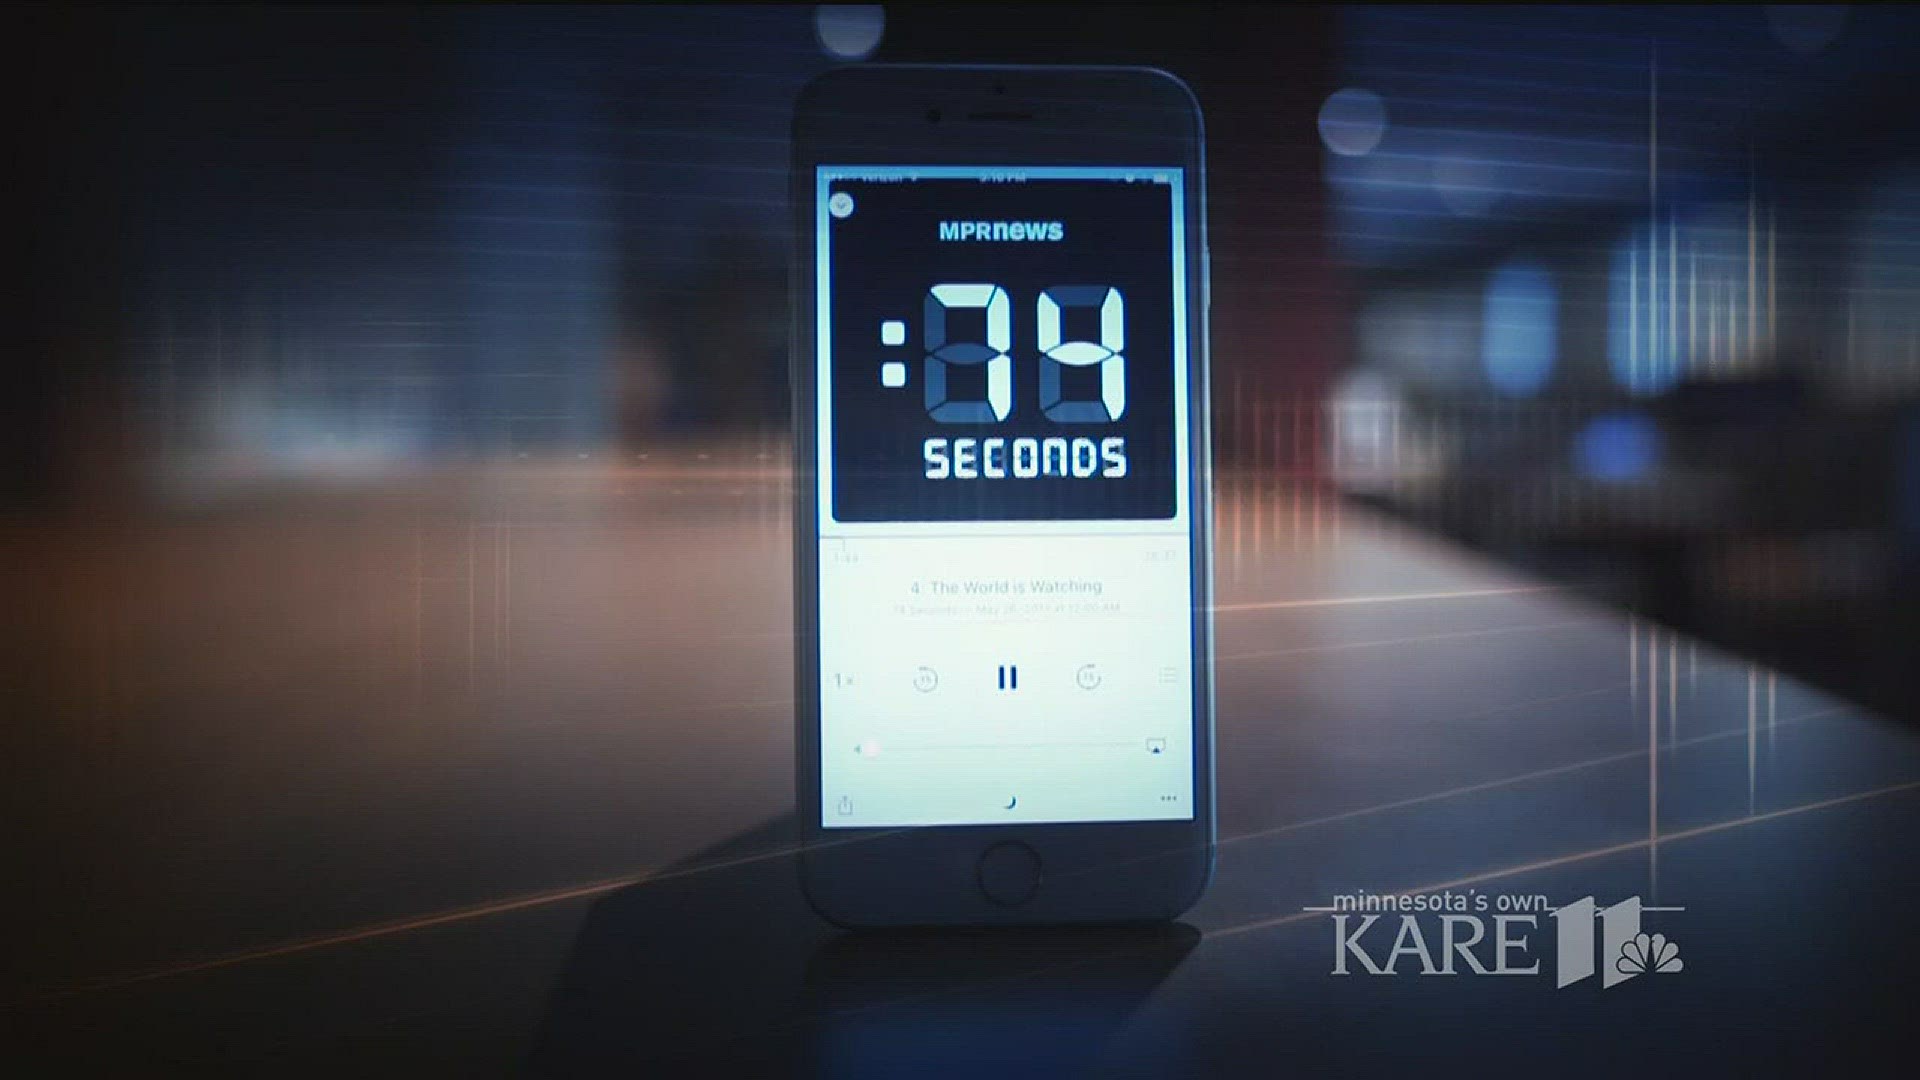 KARE 11's Jana Shortal features how journalists at MPR News are covering the Yanez trial, specifically with its podcast, 74 seconds.